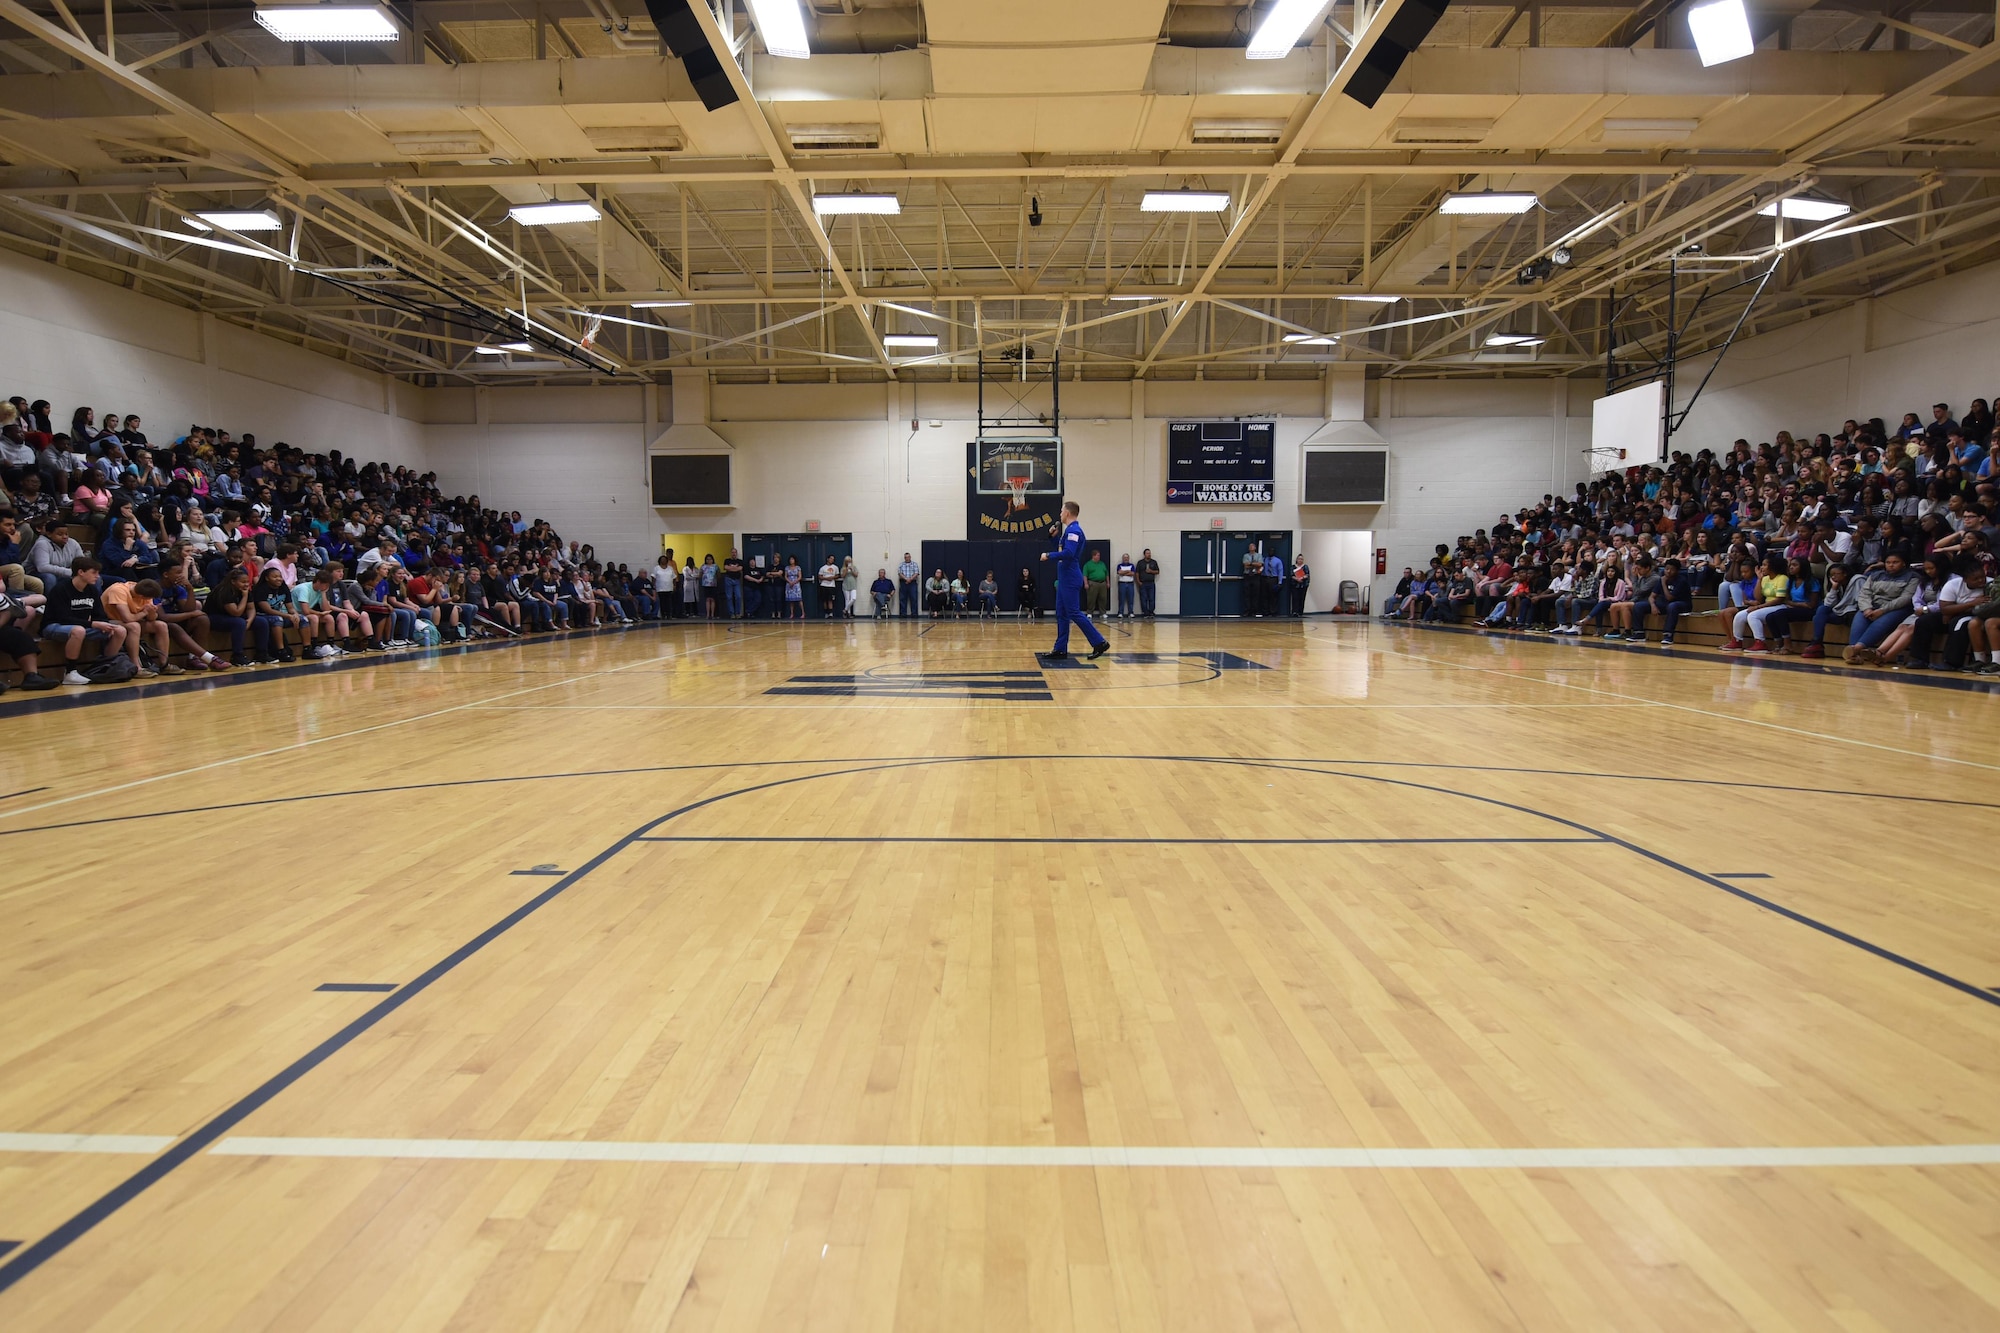 Lt. Nate Scott, U.S. Navy Blue Angels left wing pilot, speaks at an assembly, May 19, 2017, at Eastern Wayne High School in Goldsboro, North Carolina. The Blue Angels will headline the Wings Over Wayne Air Show at Seymour Johnson Air Force Base, North Carolina, May 20-21. (U.S. Air Force photo by Airman 1st Class Miranda A. Loera)